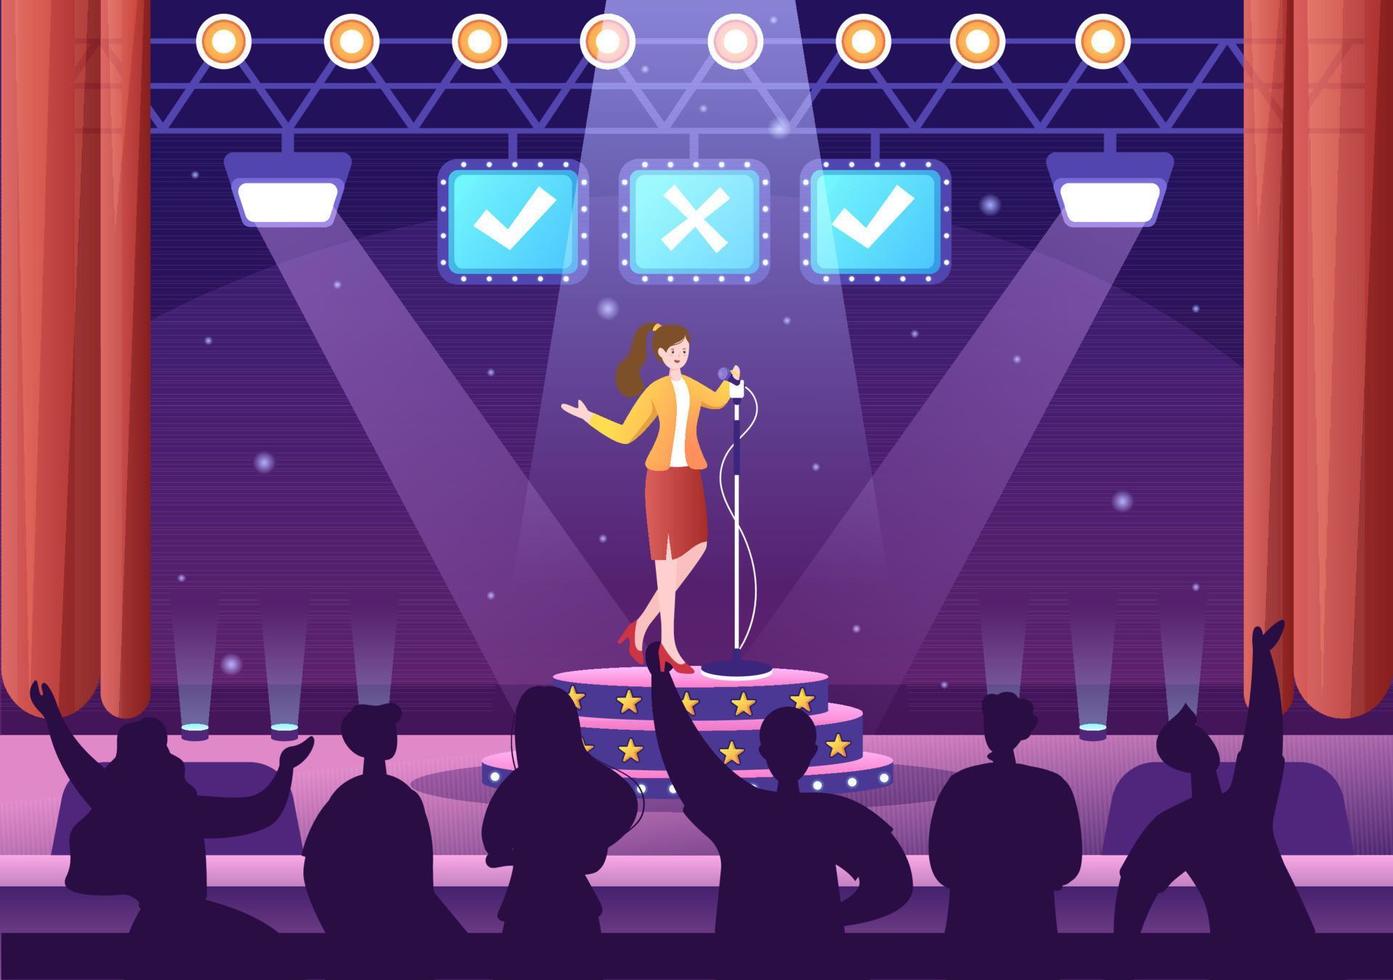 Talent Show with Contestants Displaying their Skill on Stage or Podium in Front of Judges Judging them in Cartoon Illustration vector